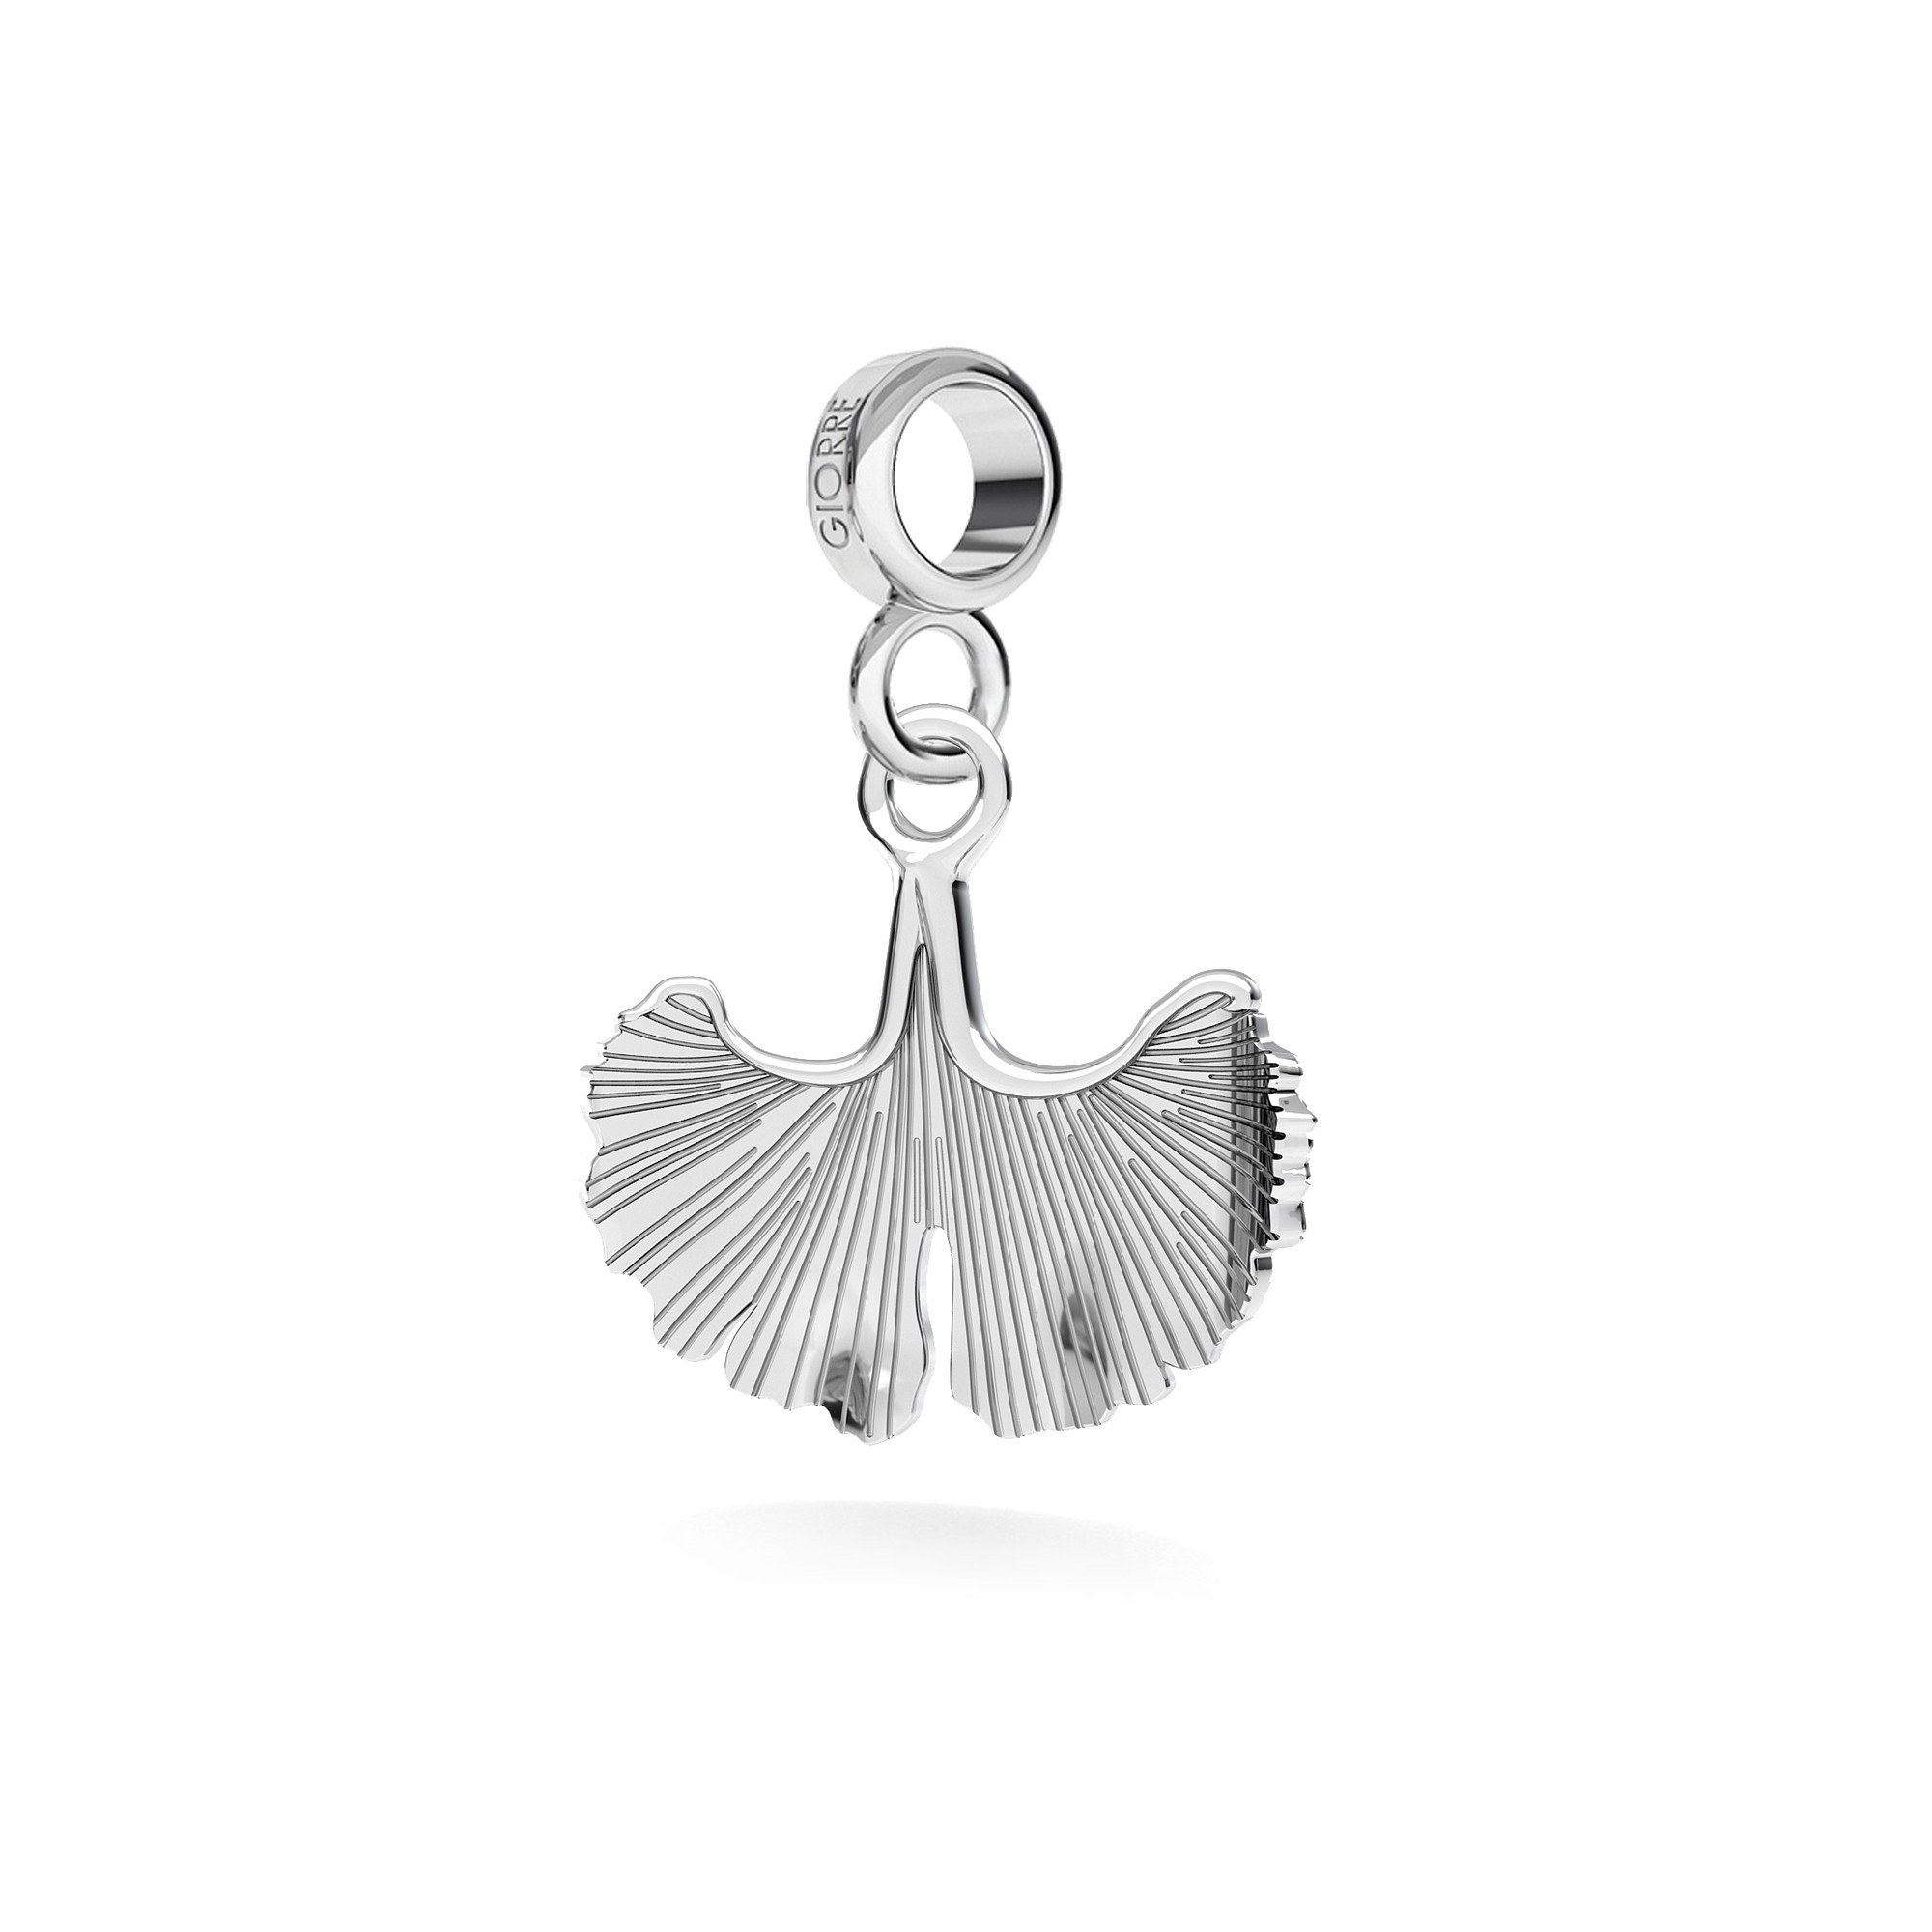 FEATHER pendant charms bead sterling silver